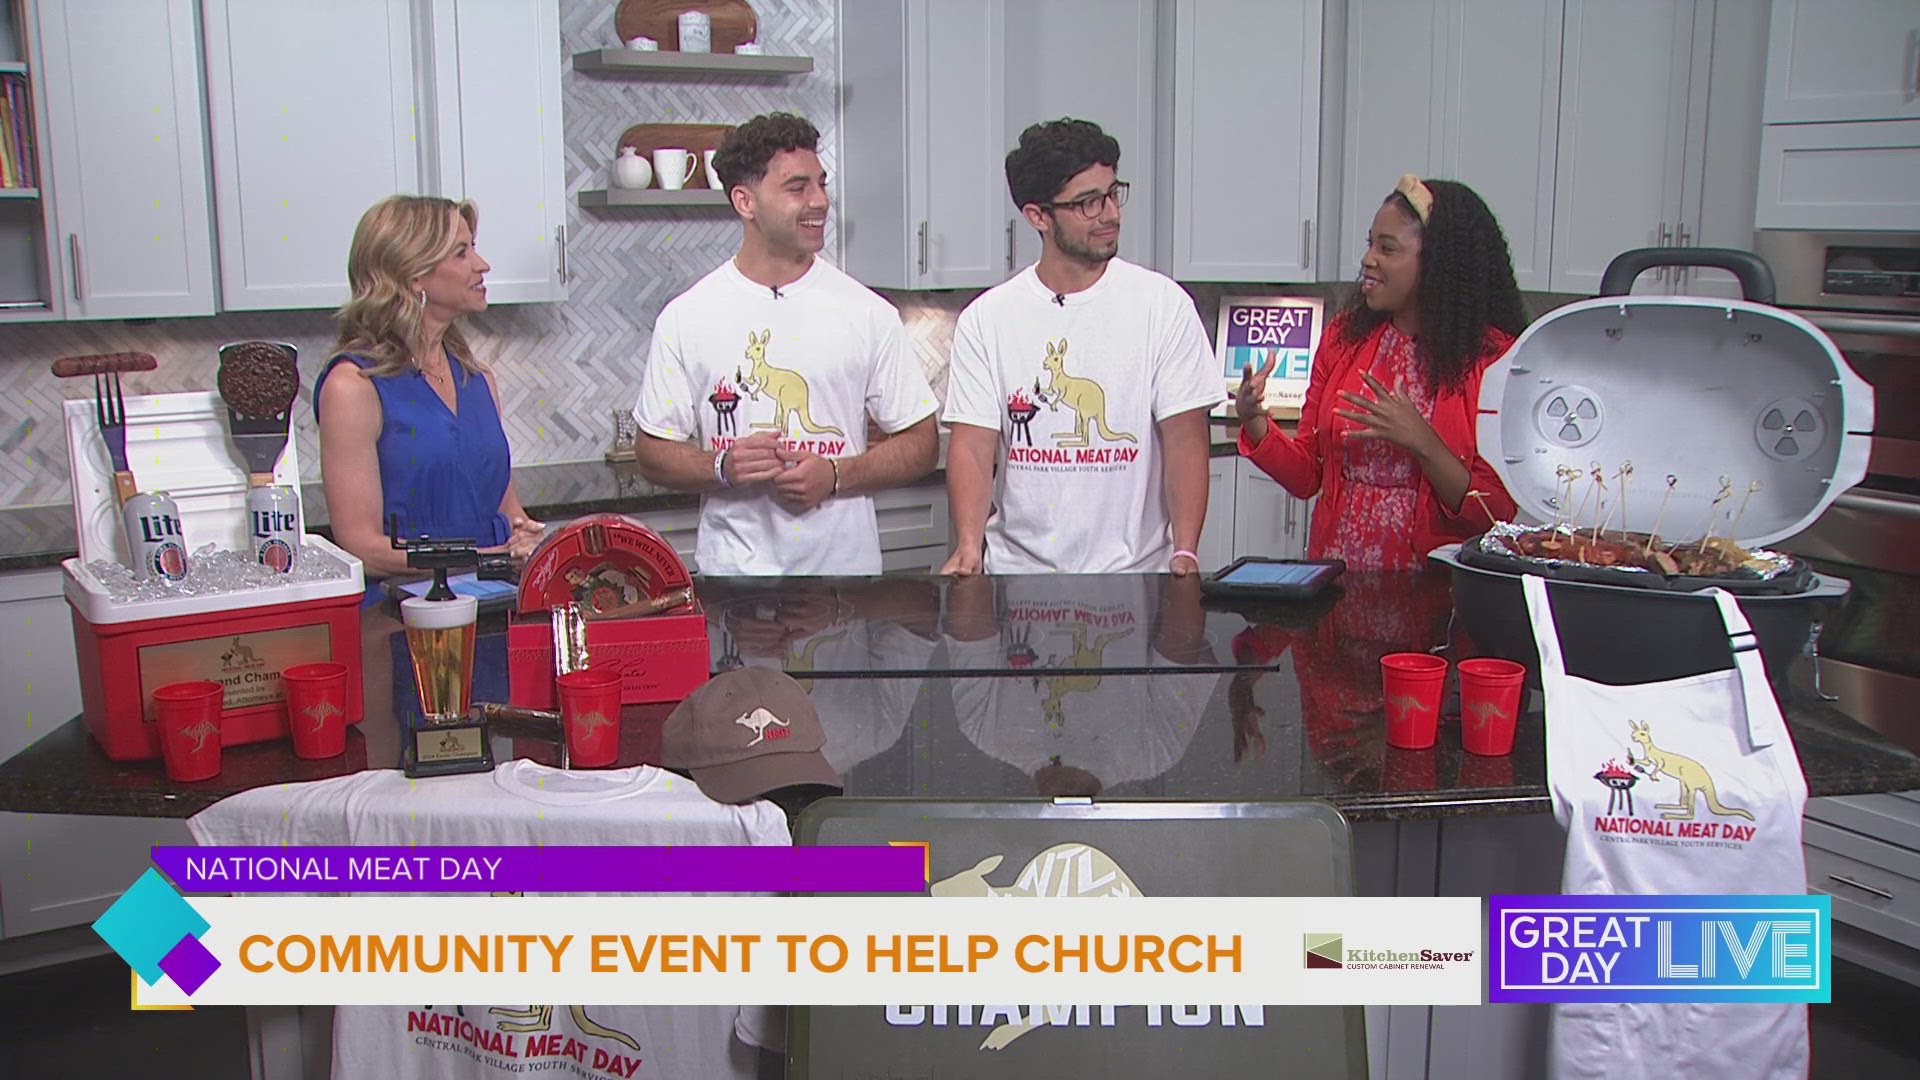 National Meat Day is a community barbecue competition directly benefitting St. Joseph’s Church and School. GDL got details from the event’s organizers.